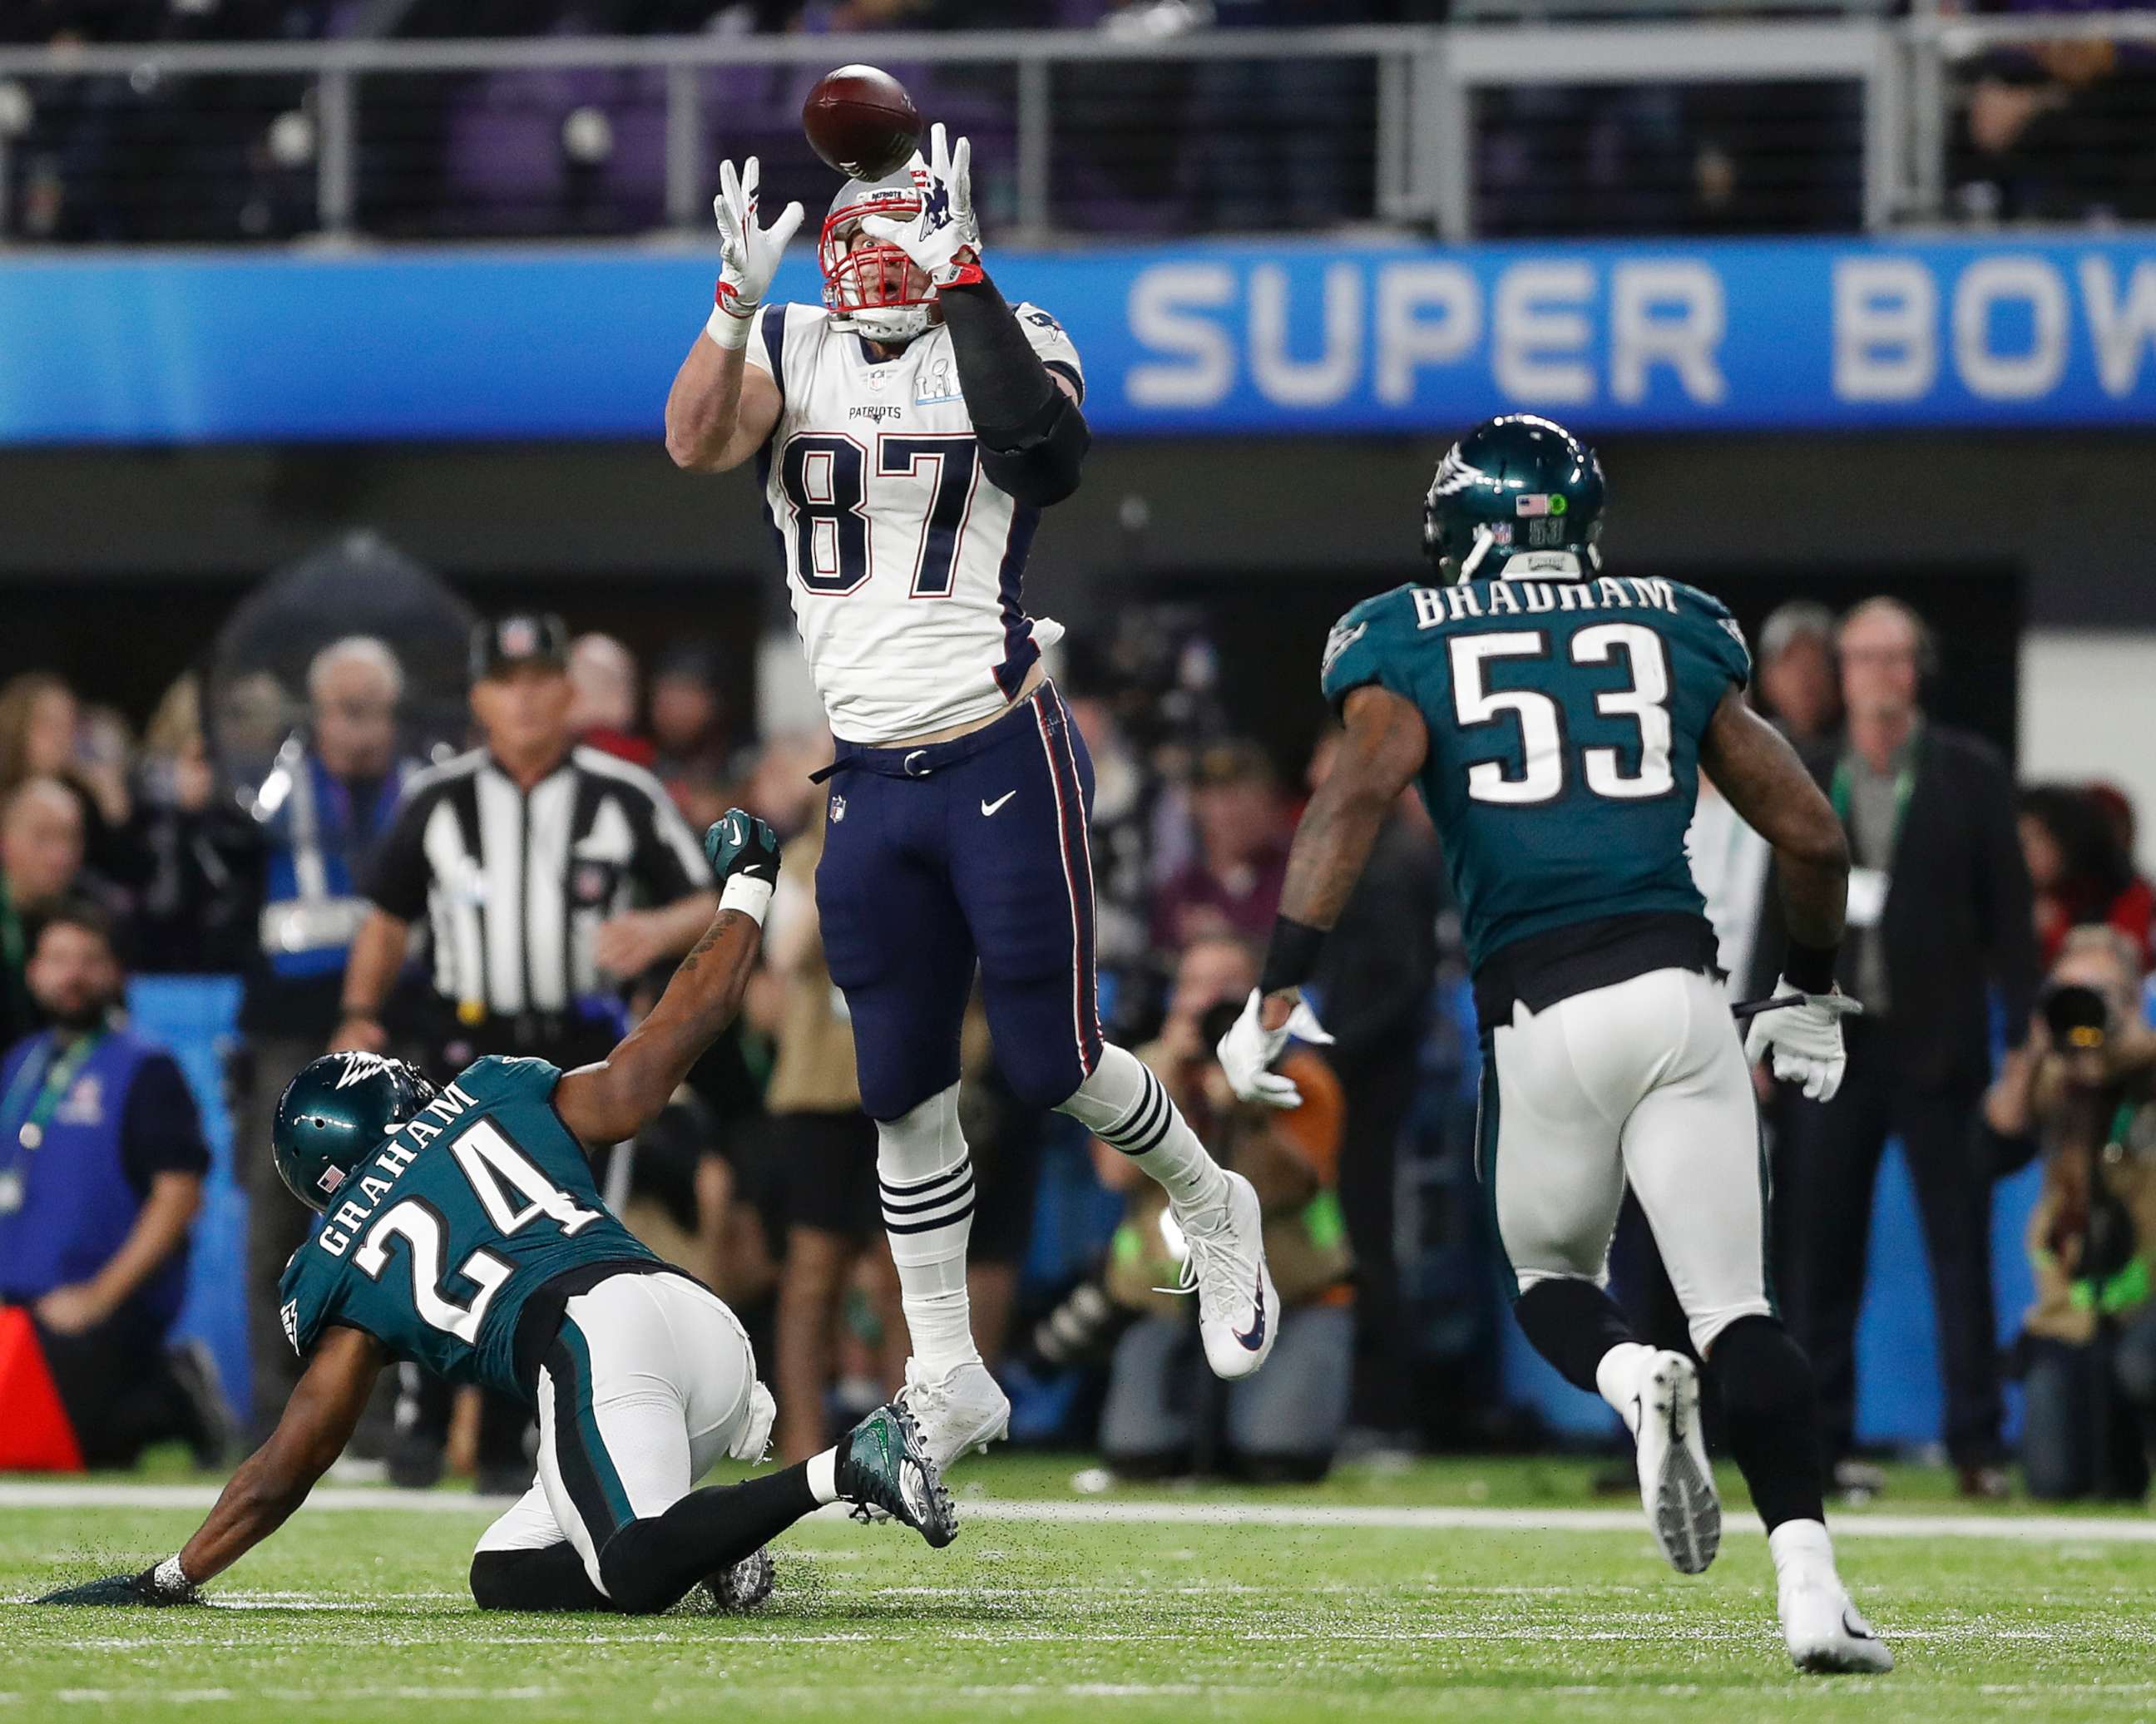 PHOTO: New England Patriots' Rob Gronkowski catches a pass during the second half of the NFL Super Bowl 52 football game against the Philadelphia Eagles, Feb. 4, 2018, in Minneapolis.